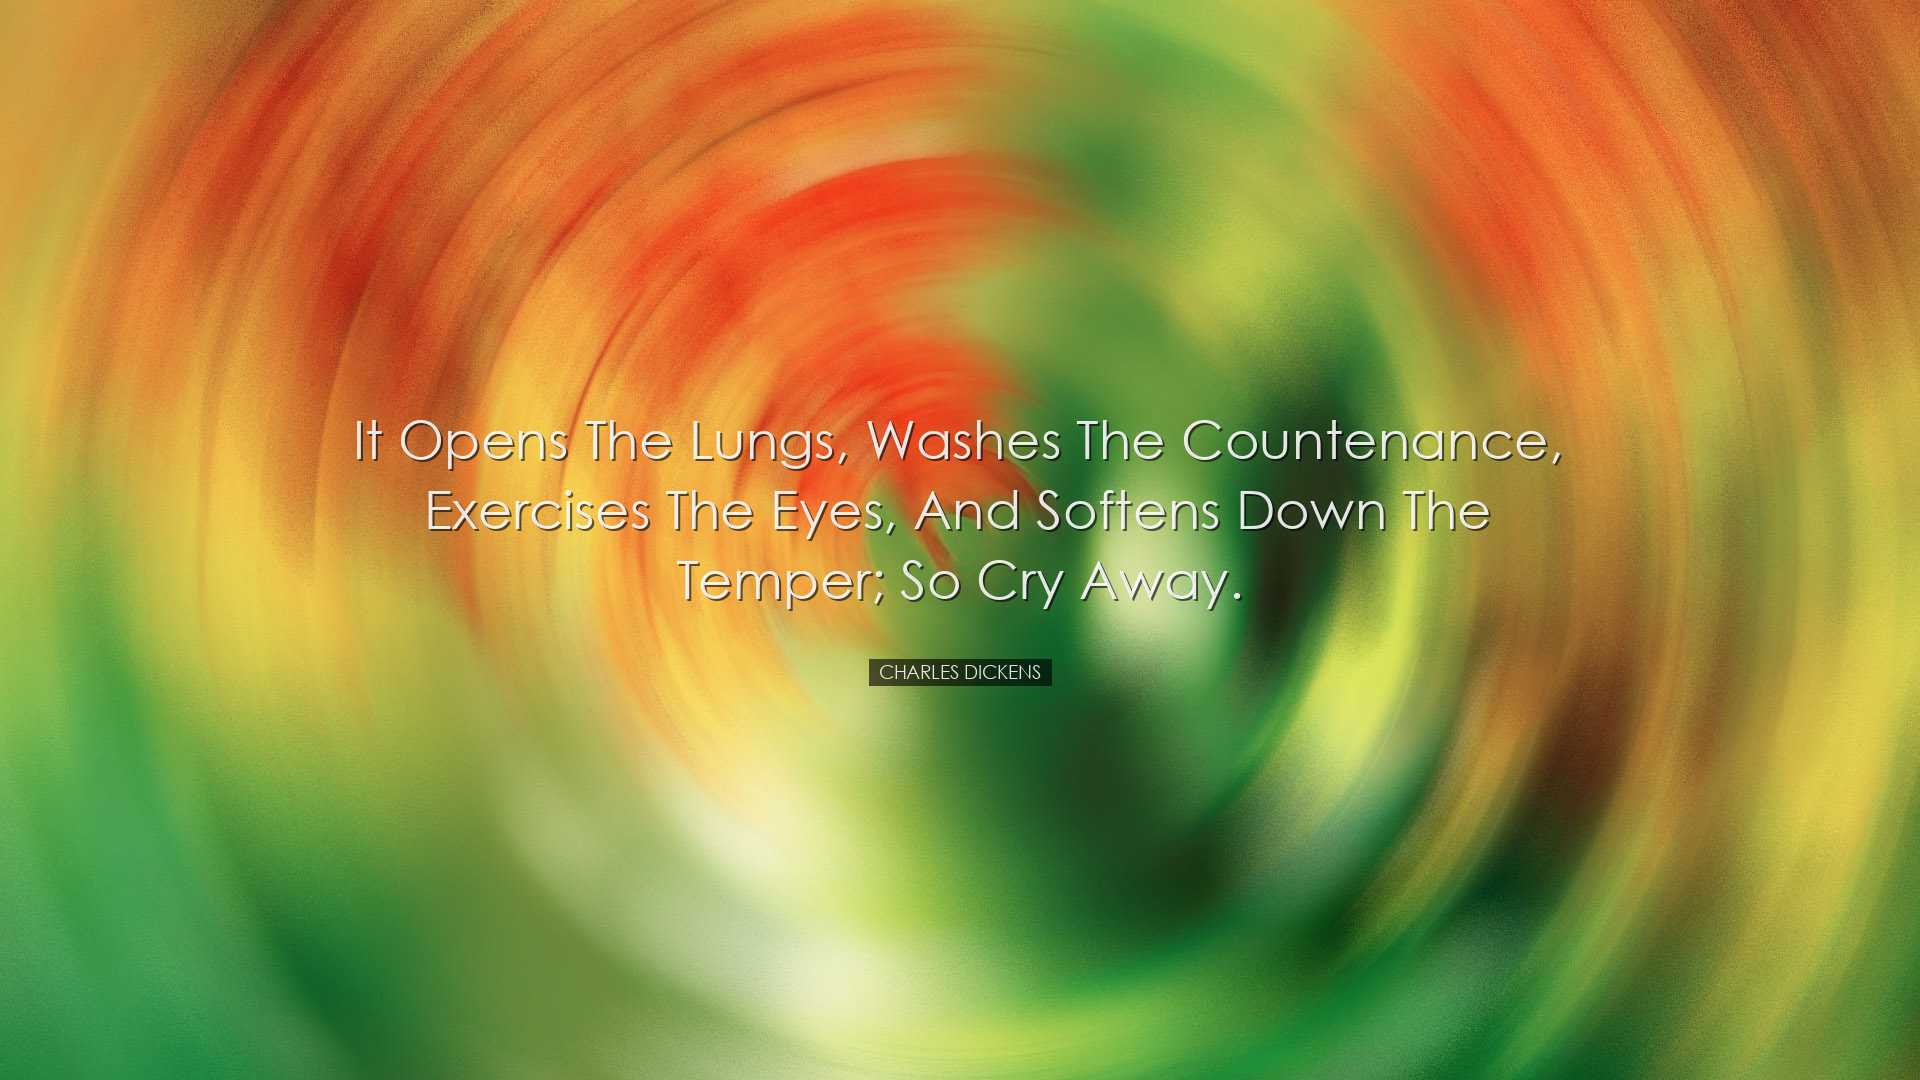 It opens the lungs, washes the countenance, exercises the eyes, an